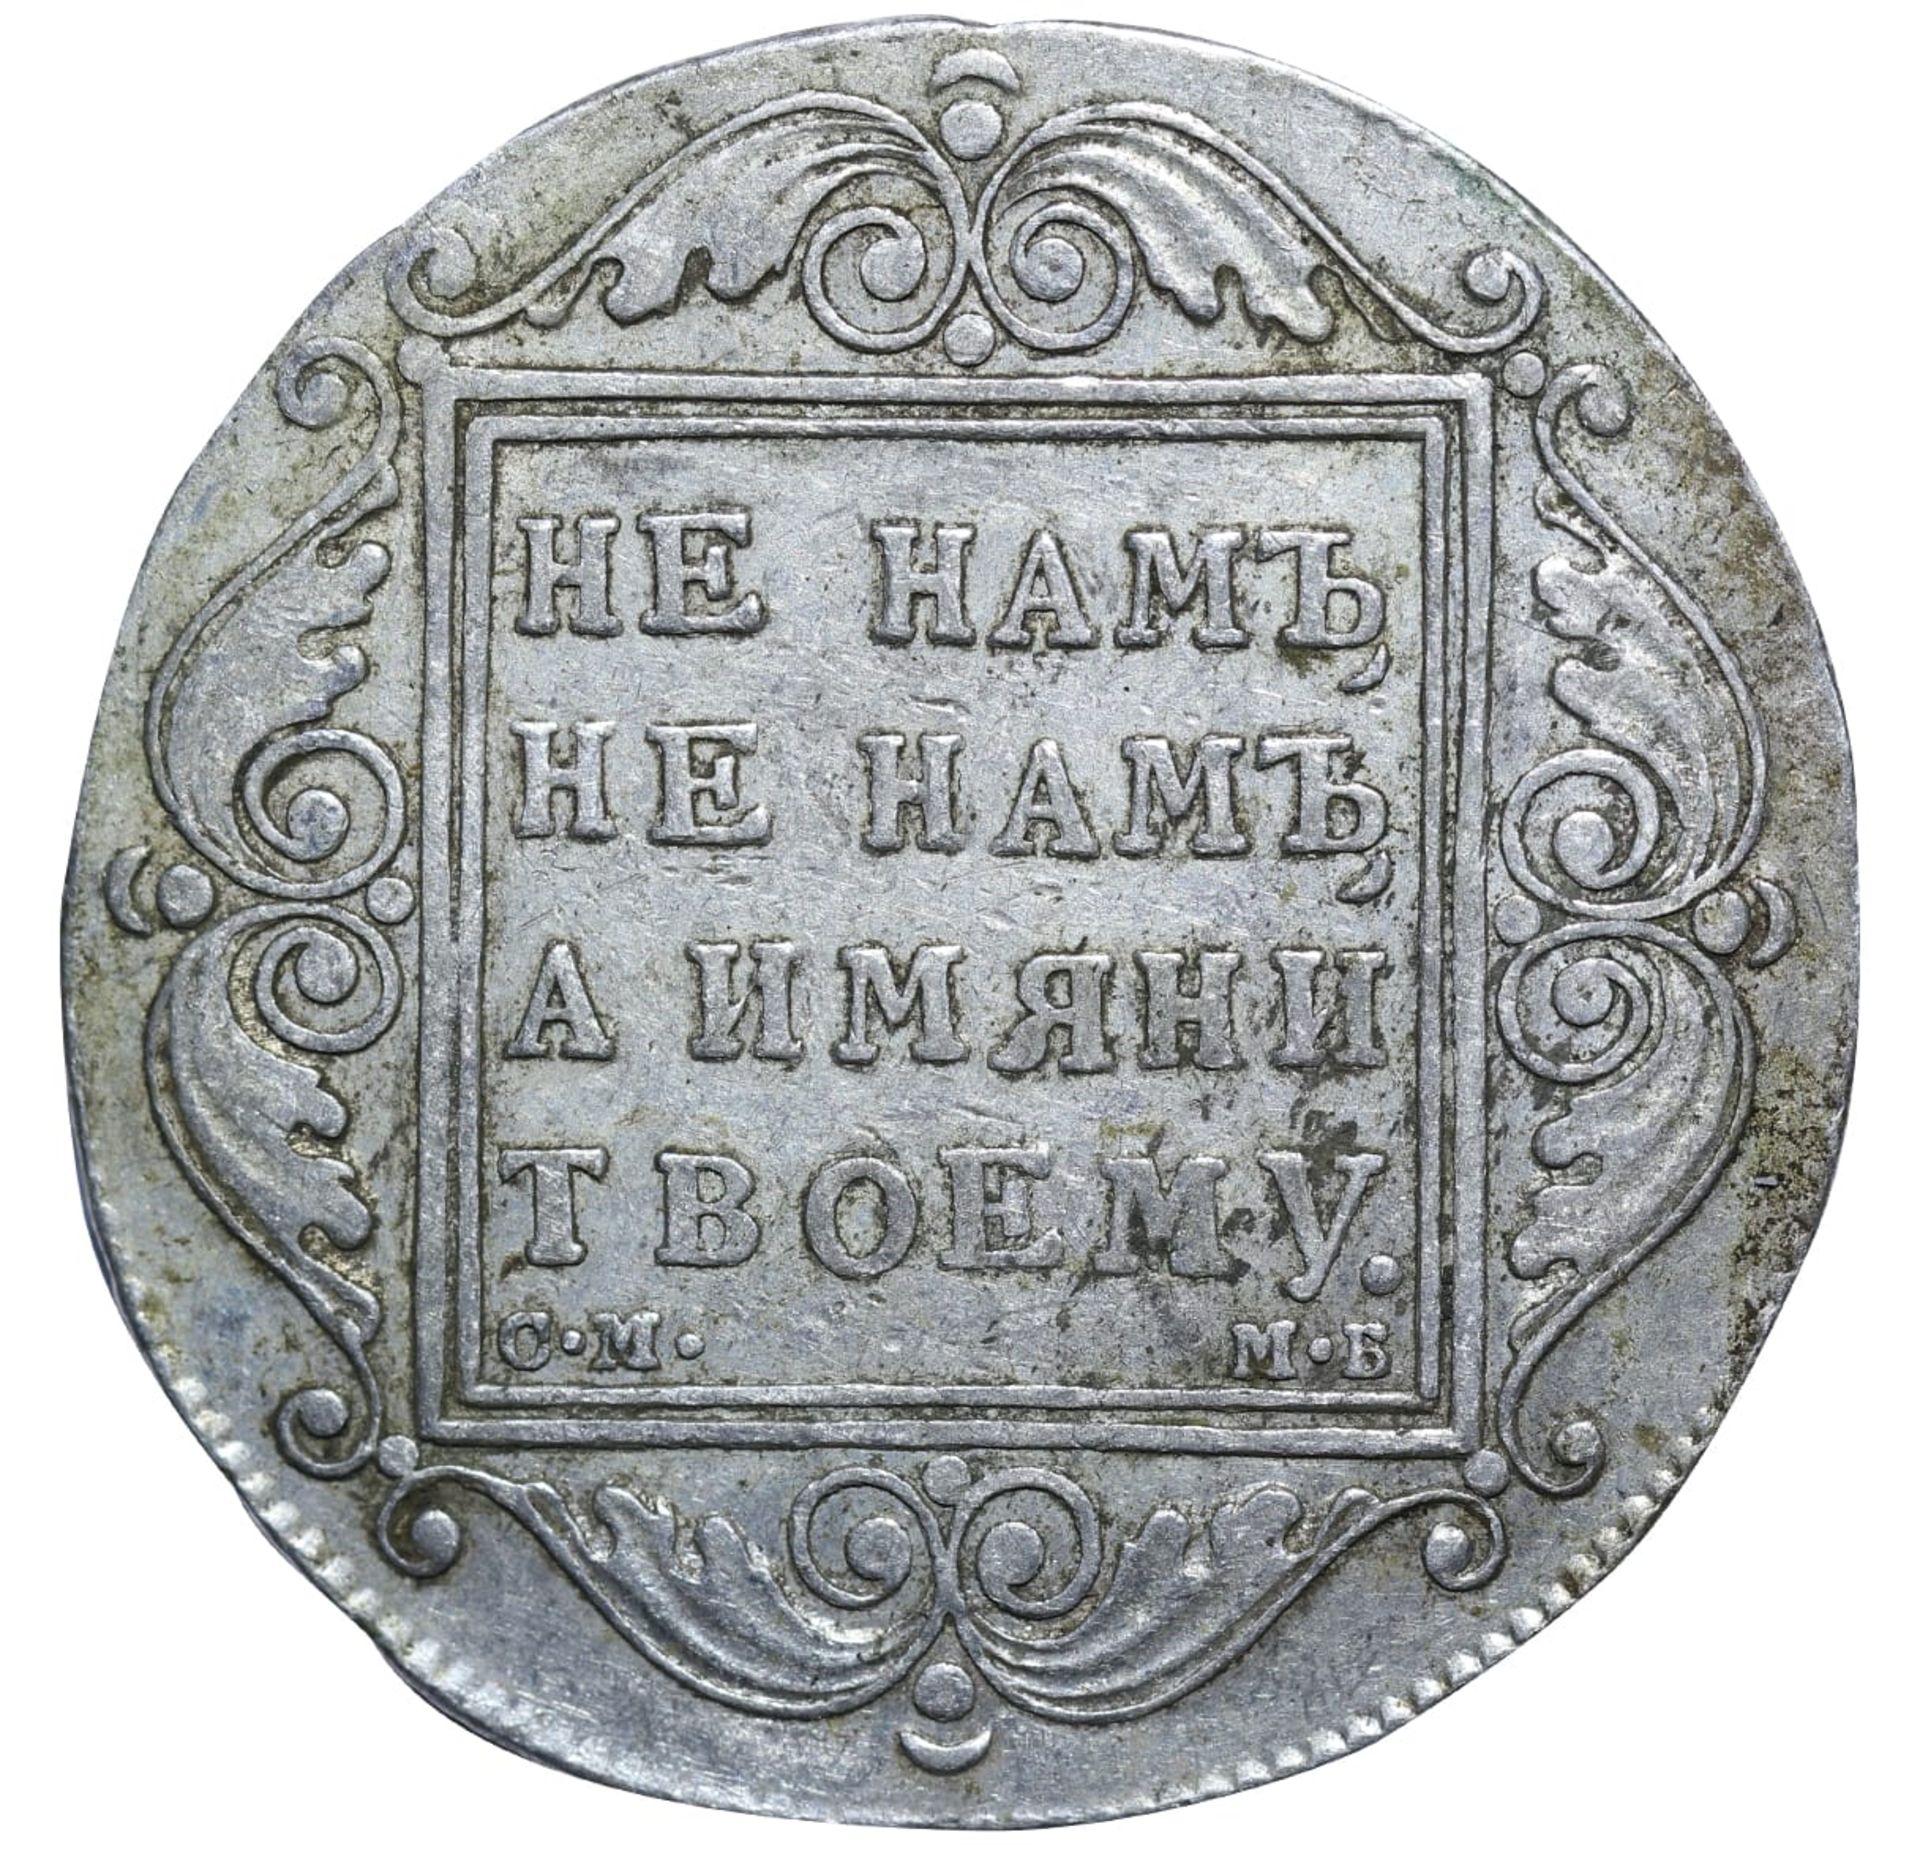 Russian Empire, 1 Rouble, 1799 year, SM MB - Image 2 of 3